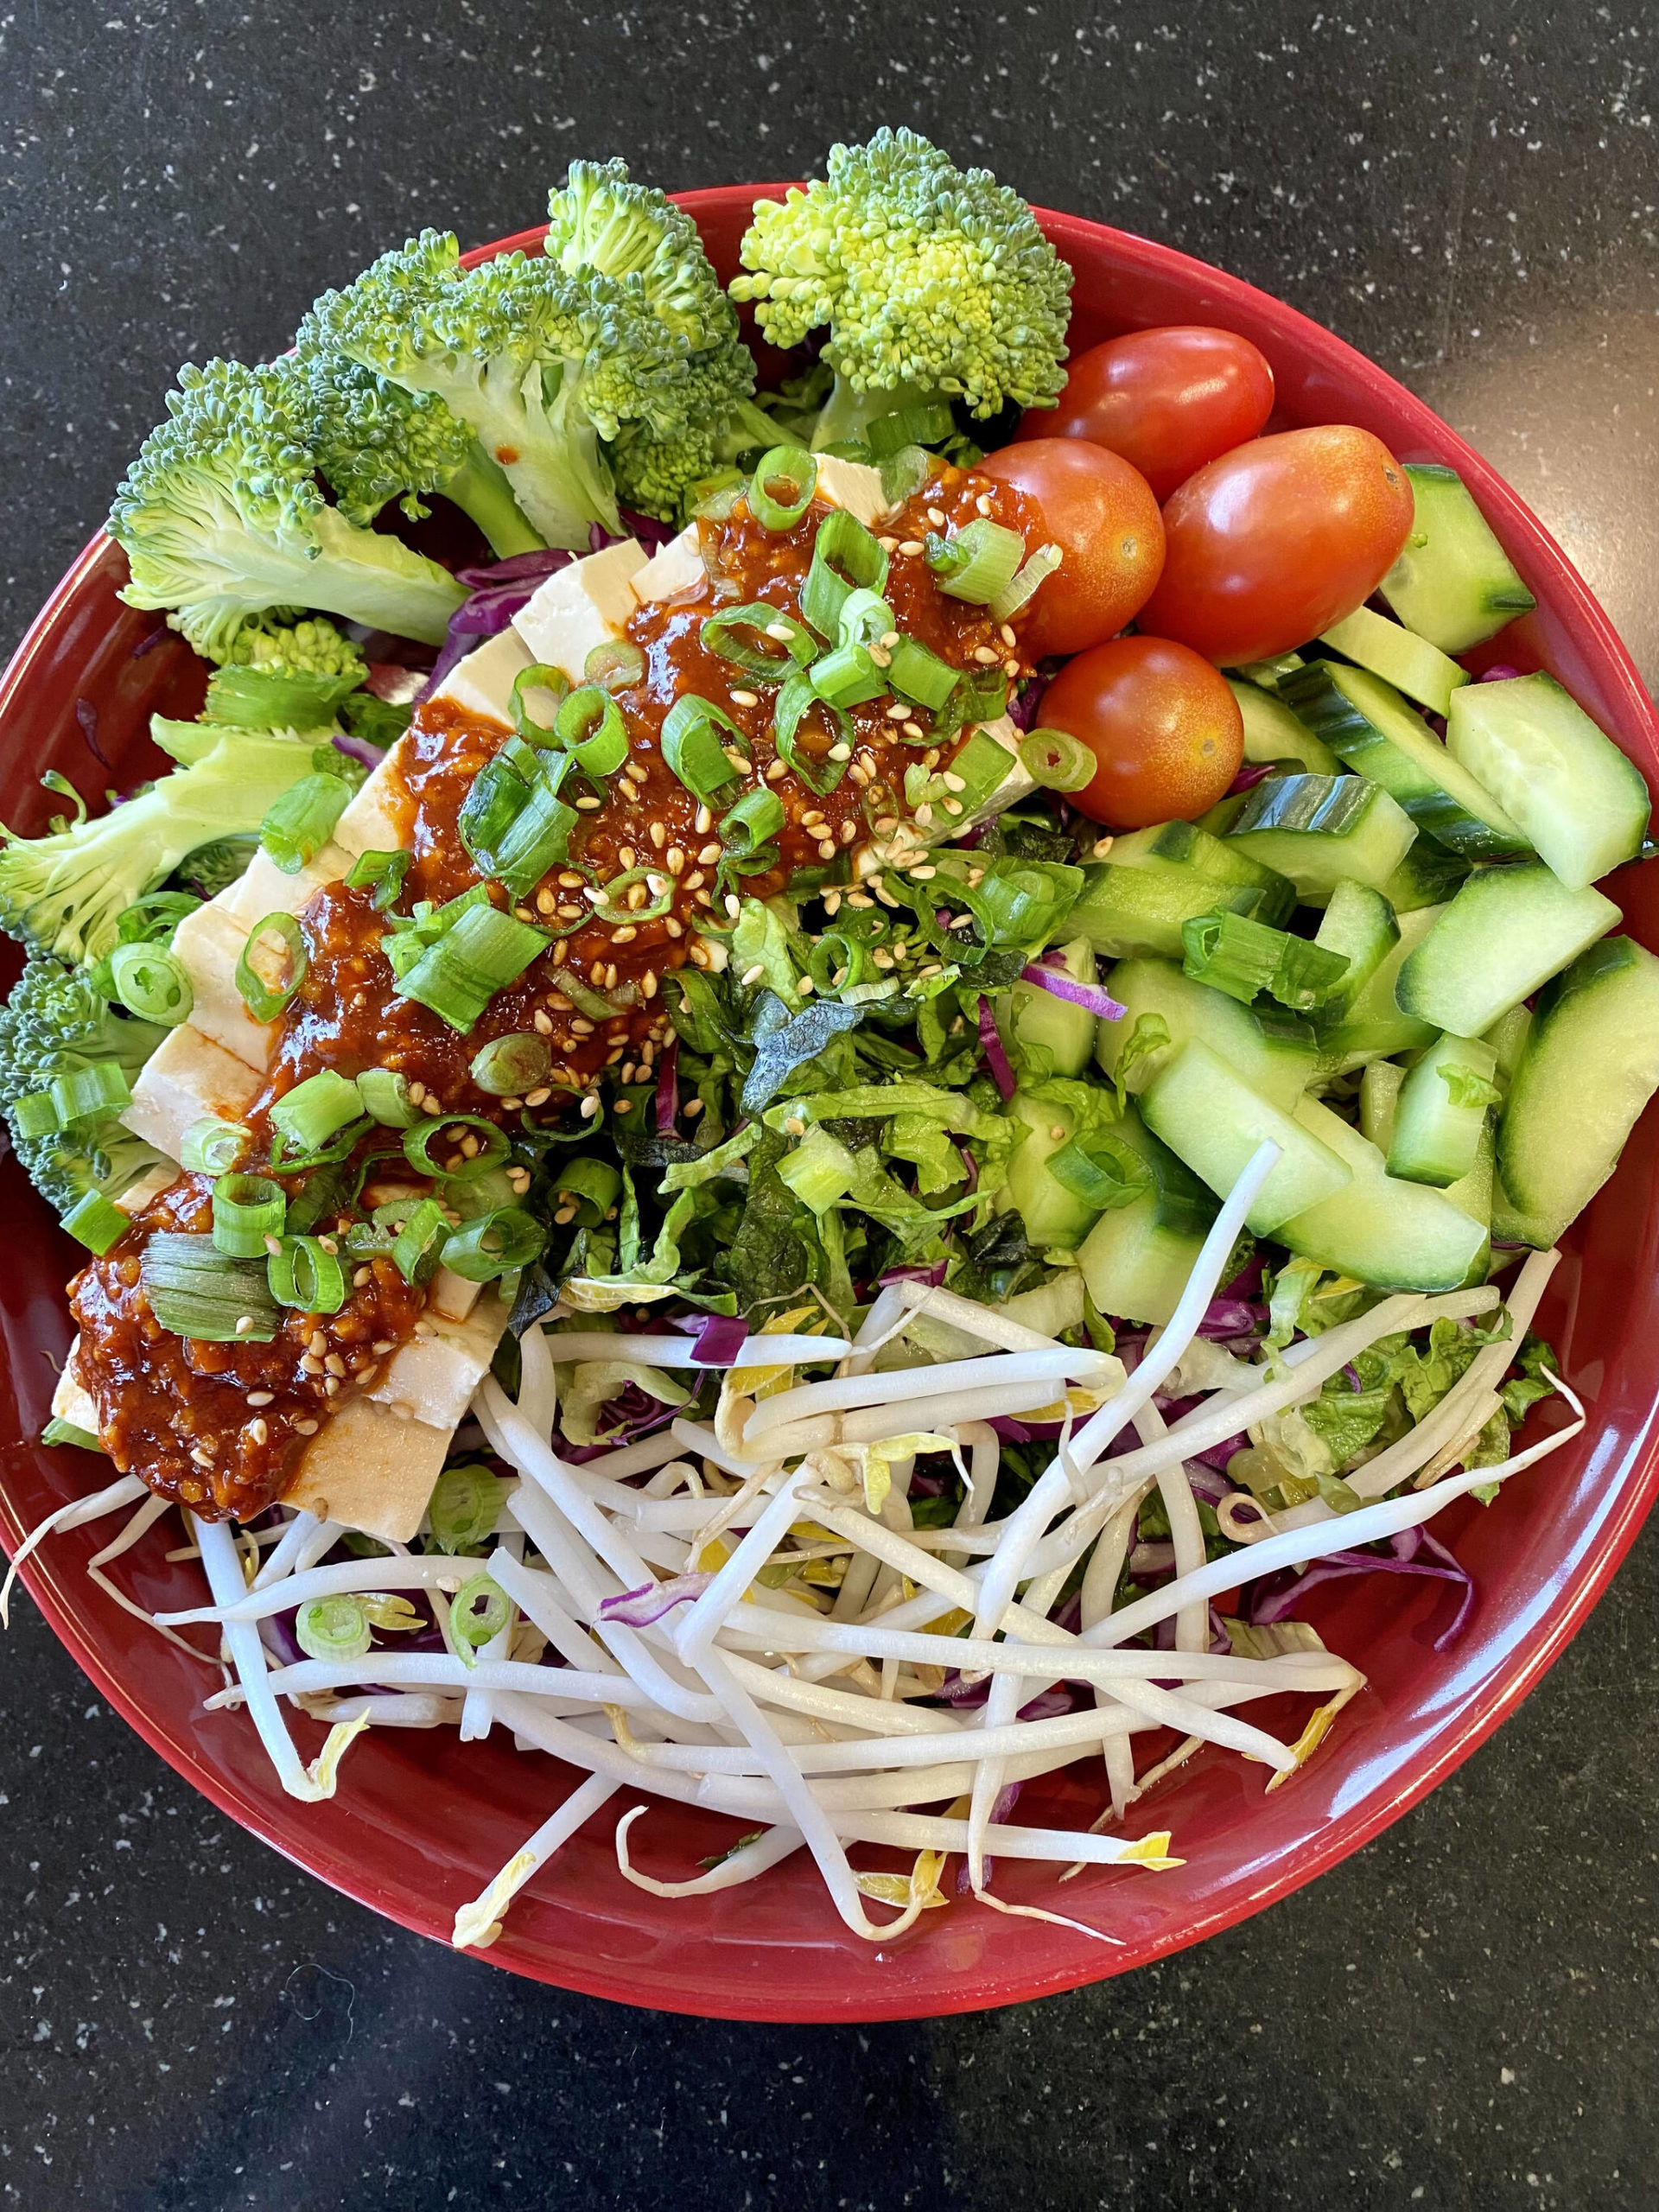 Gochujang dressing spices up tofu, lettuce, veggies and sprouts. (Photo by Tressa Dale/Peninsula Clarion)